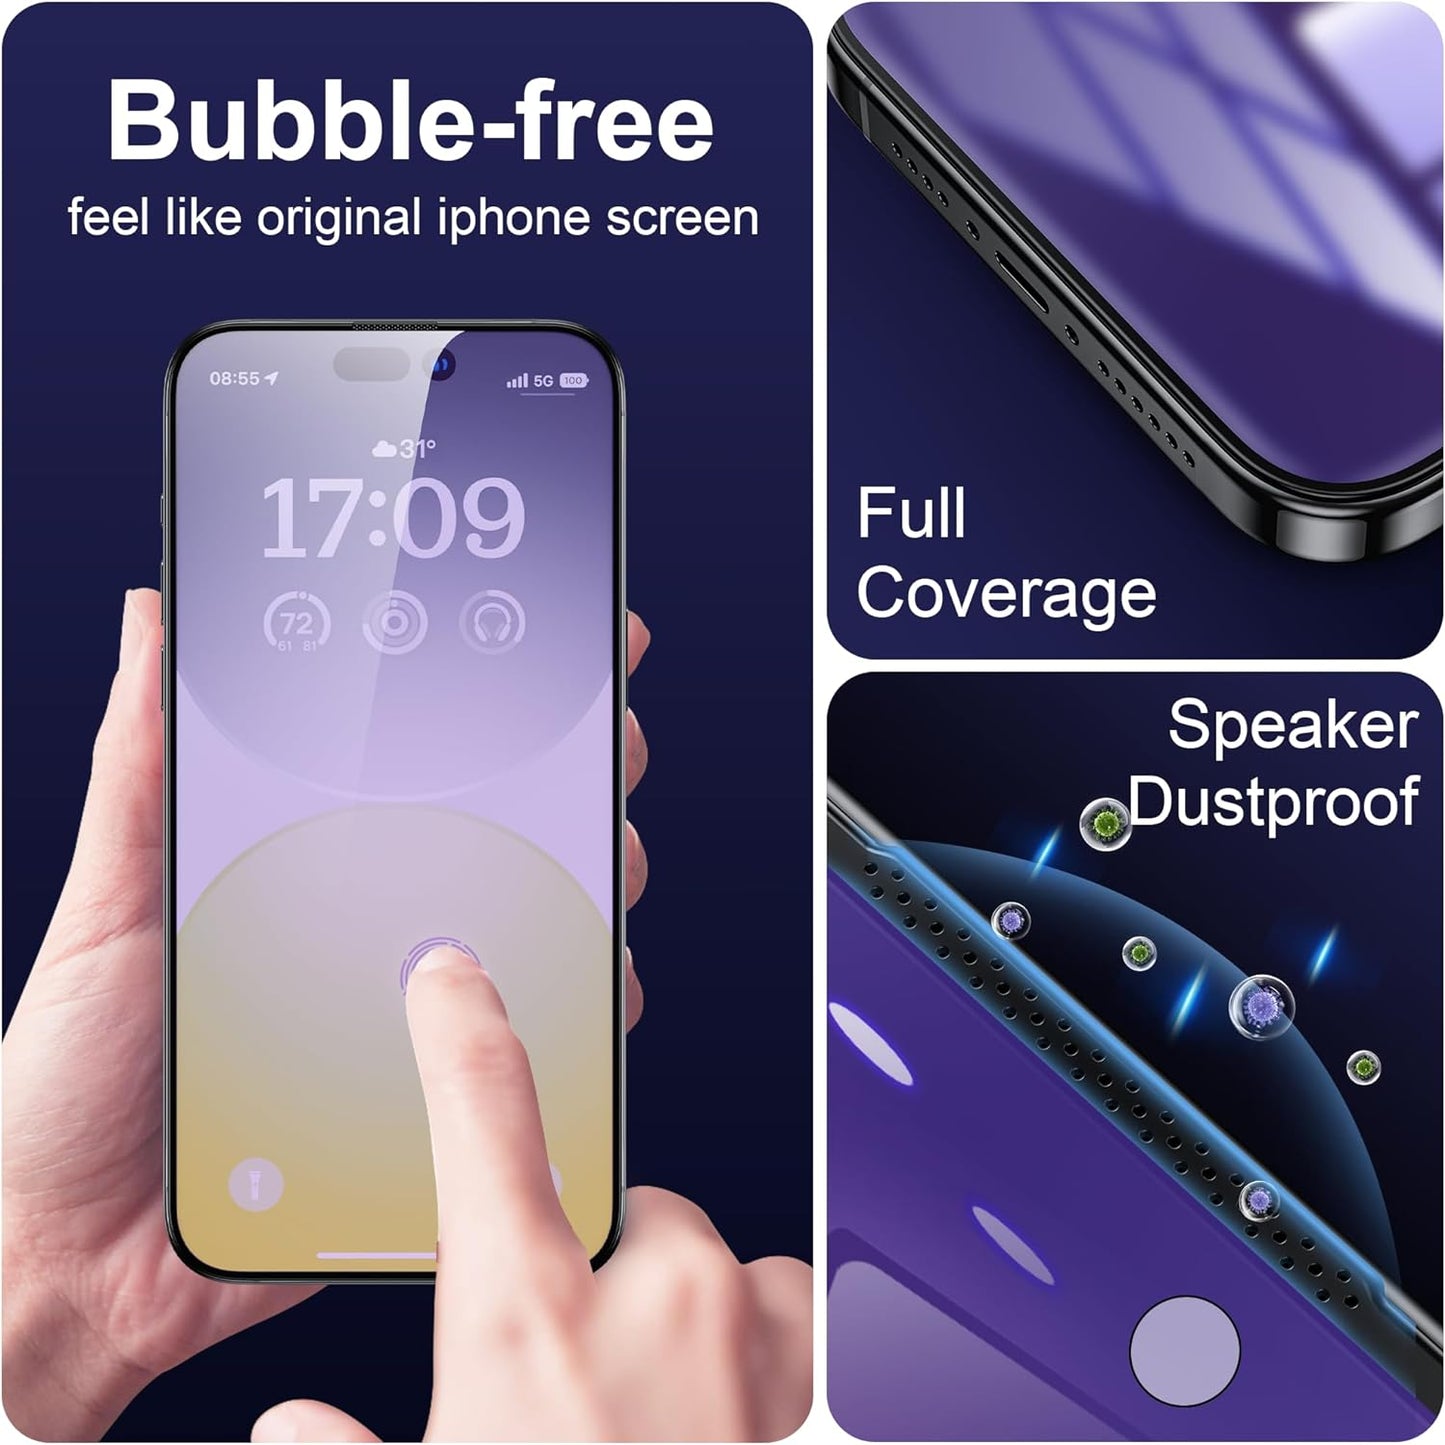 WSKEN for iPhone 15 Pro Privacy Screen Protector, [Auto-Dust Removal] 28 Degree Anti Spy Anti-Blue Light 2.5D Full Coverage Privacy Tempered Glass with Dust Clean Easy Installing House